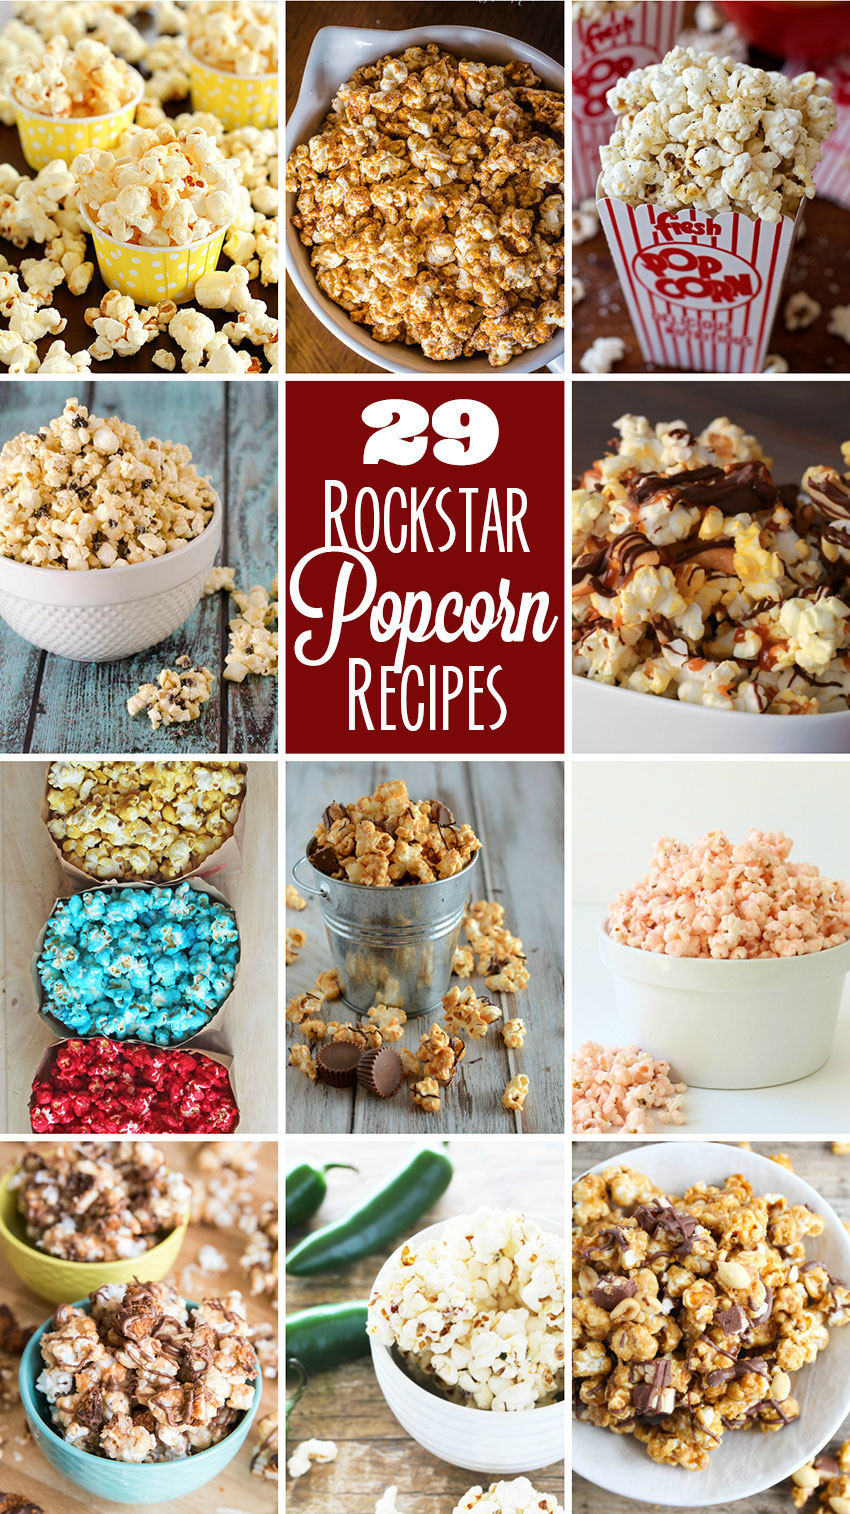 29 rockstar popcorn recipes from your favorite food bloggers!